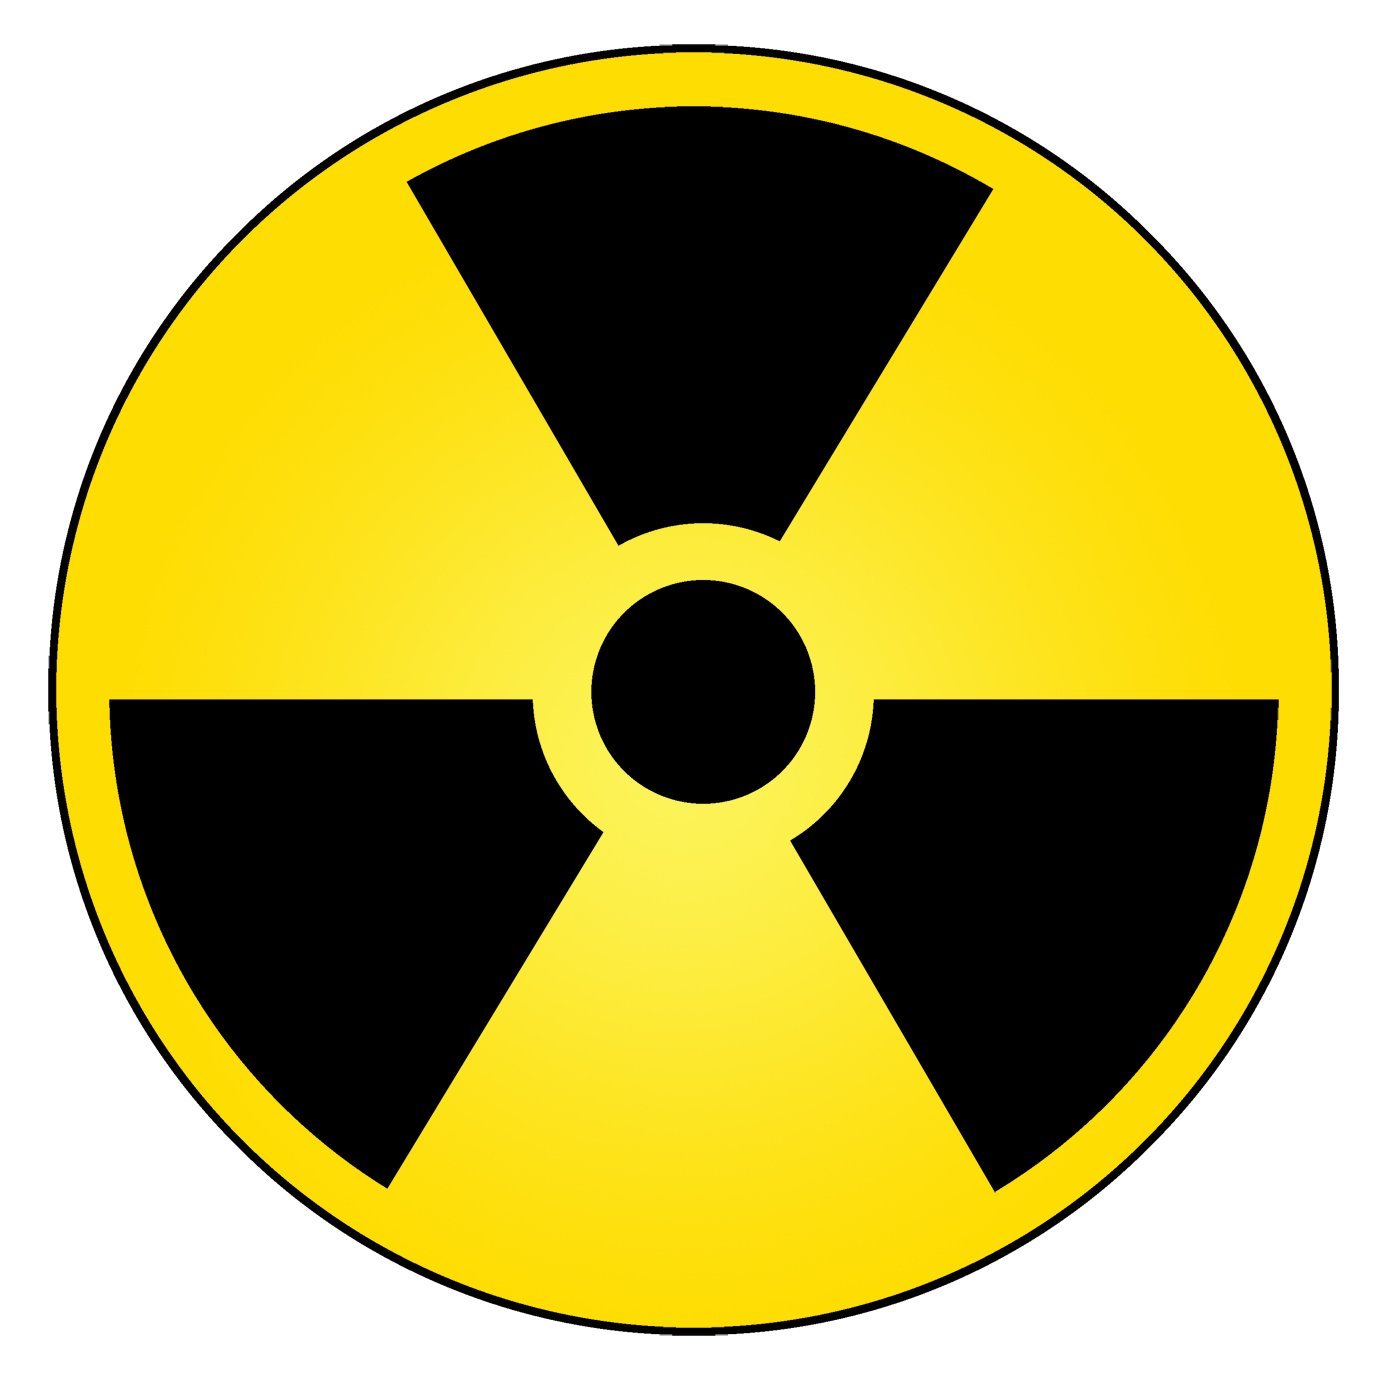 Radioactive Warning Sign - ClipArt Best